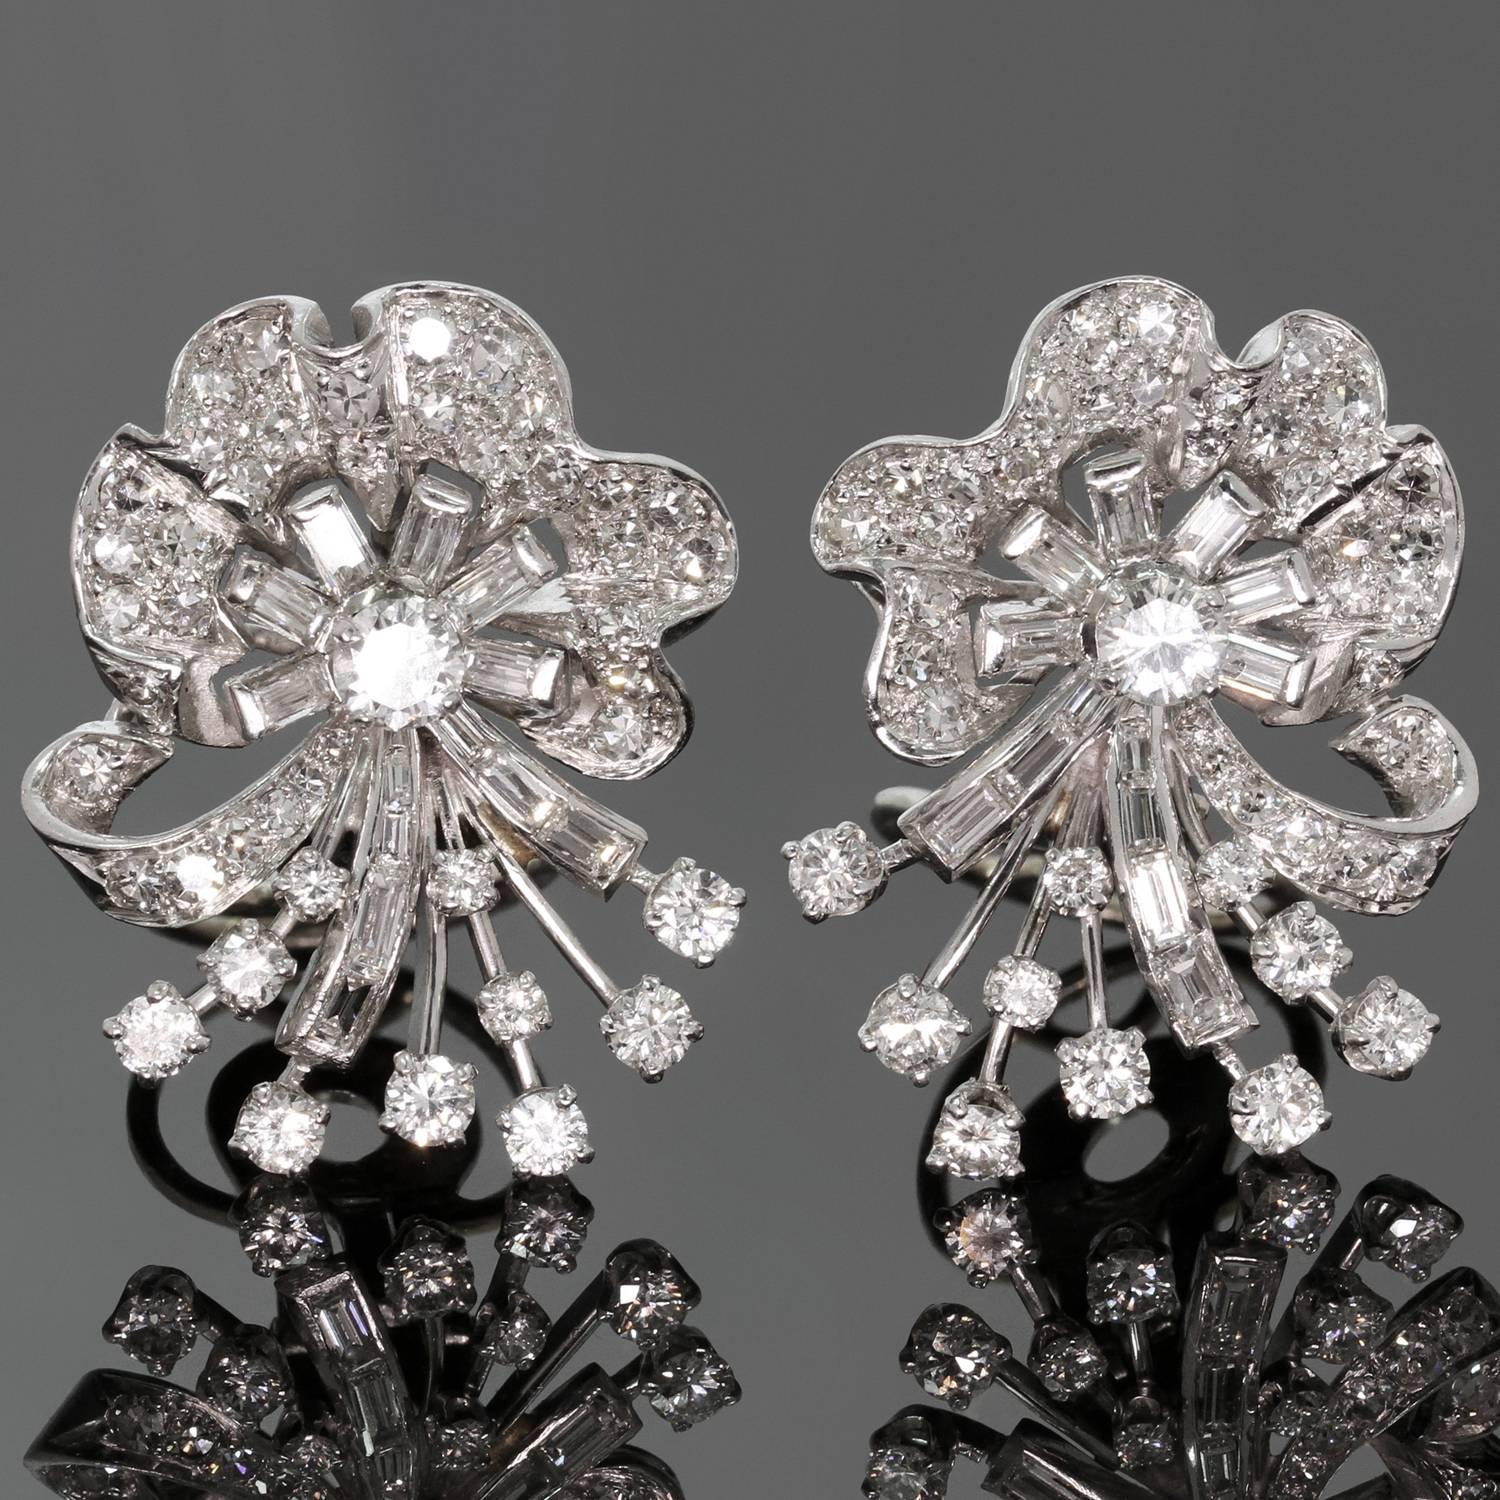 A fabulous holiday adornment! These festive clip-on earrings feature round and baguette-cut diamonds of an estimated 4.45 carats, set in platinum, and completed with custom-made extra large 14k gold omega backs. The earrings tested as platinum and